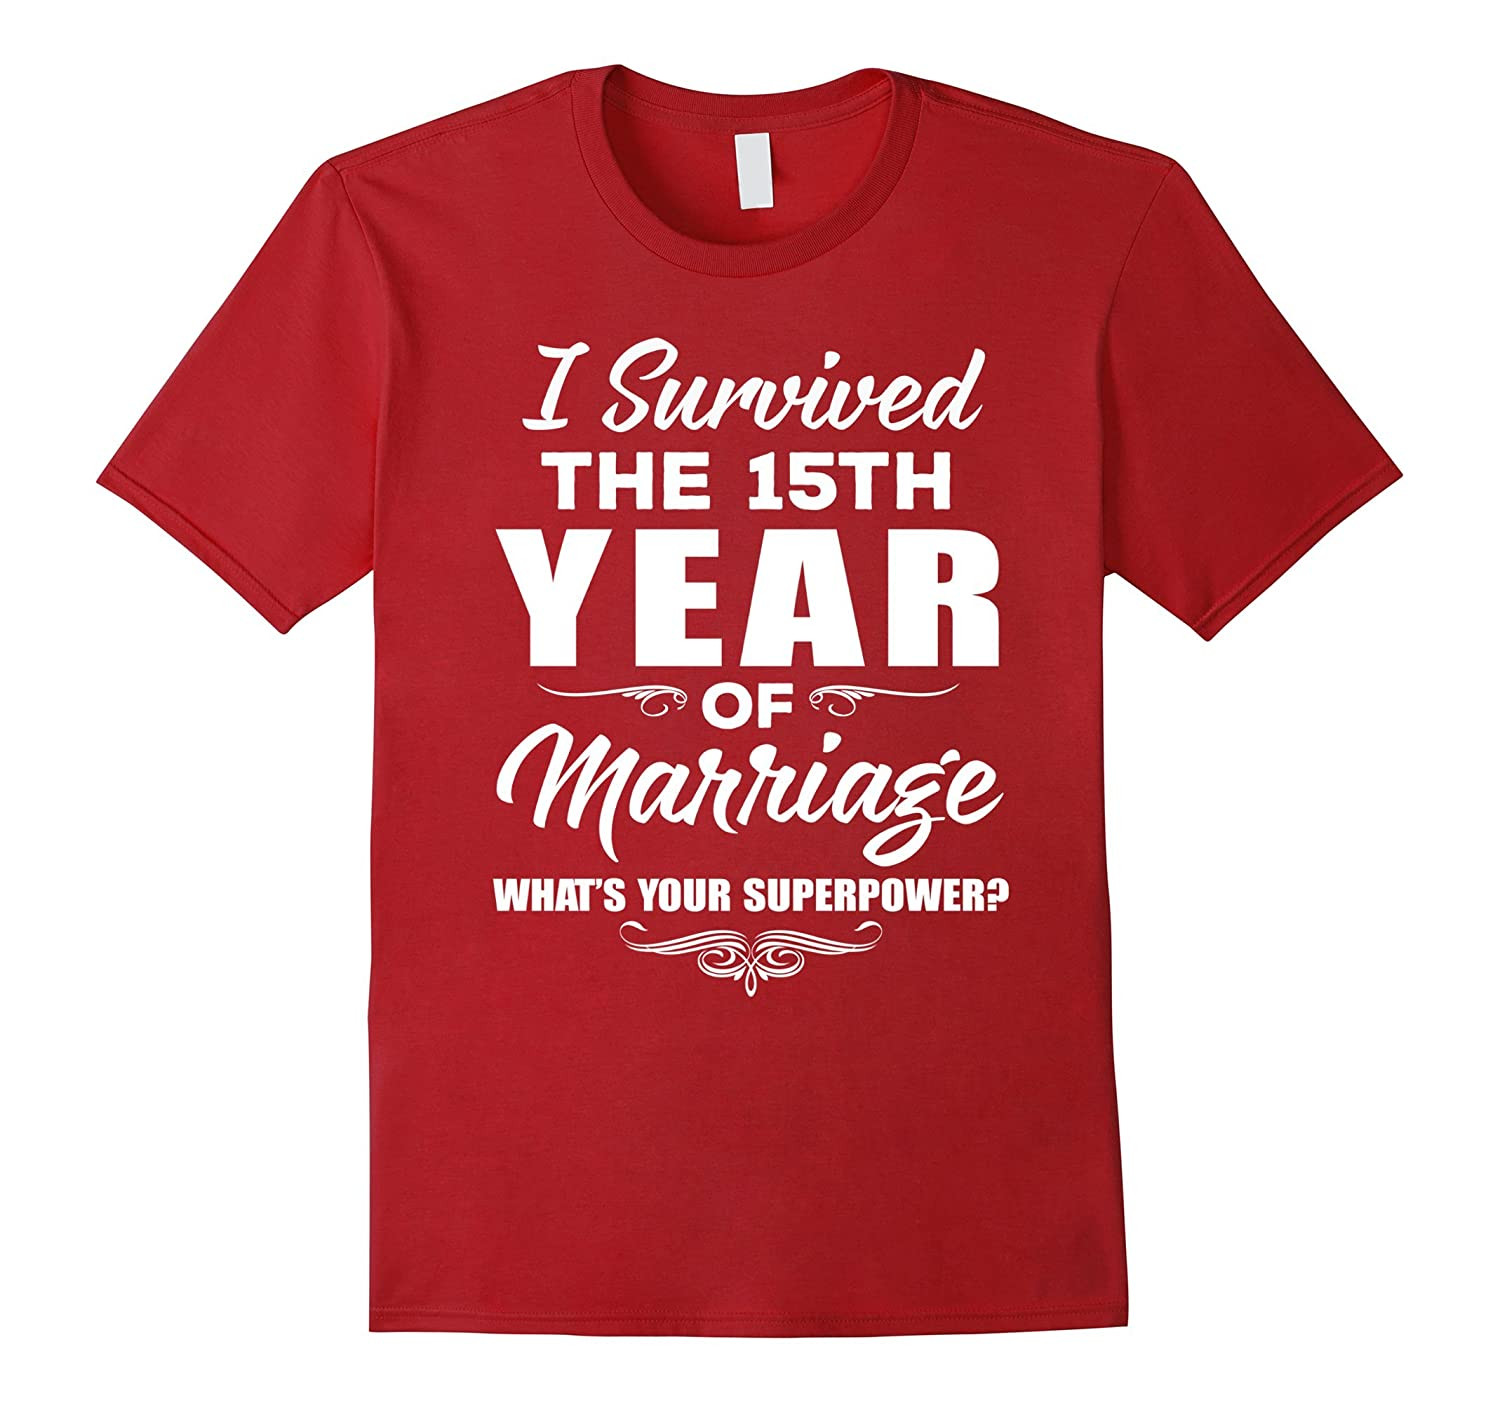 Gift Ideas For 15Th Wedding Anniversary
 I Survived T Shirt – 15th Wedding Anniversary Gift Ideas